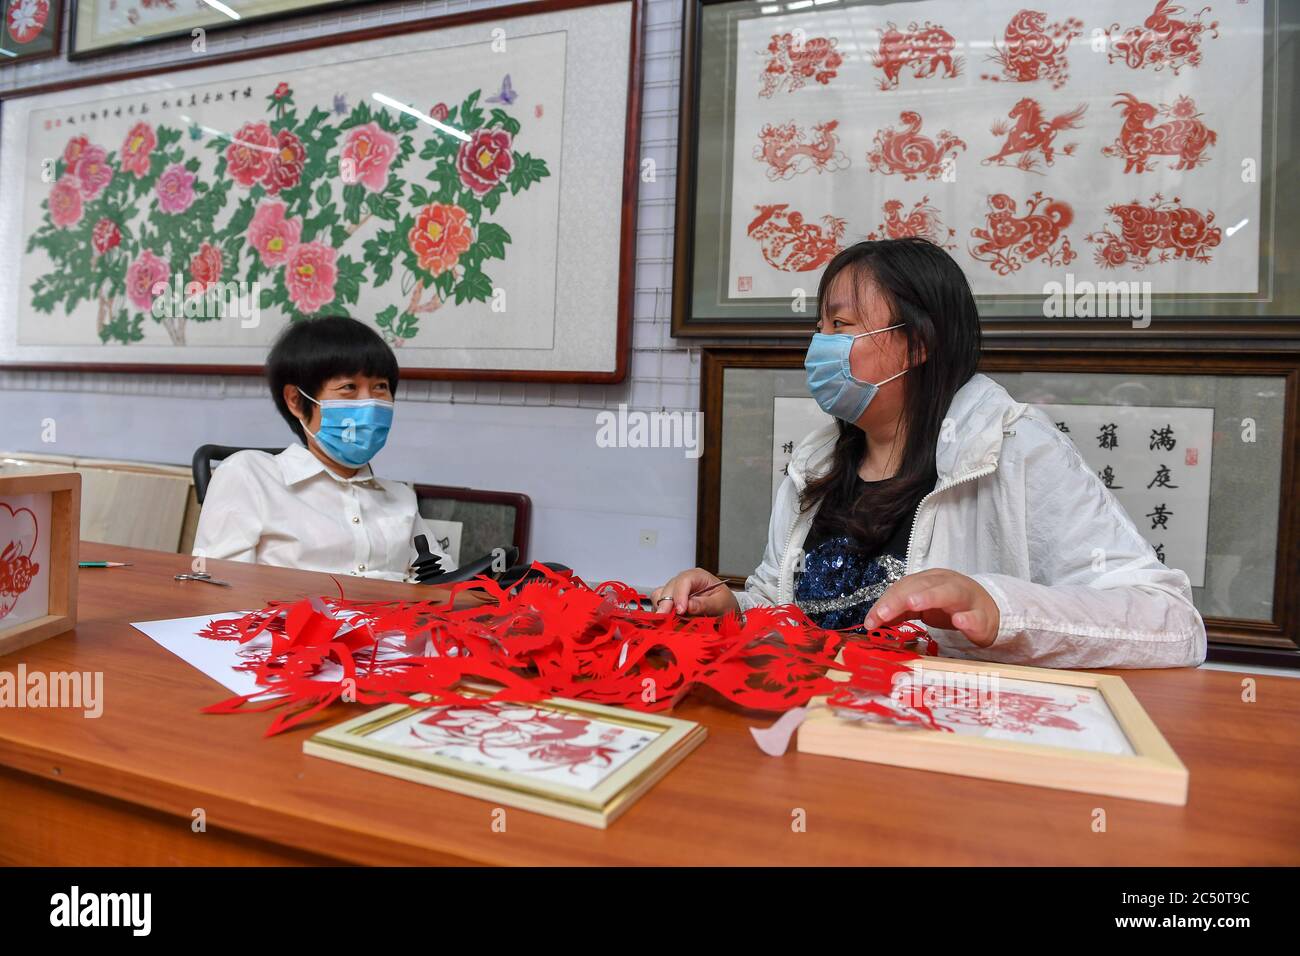 Changchun, China's Jilin Province. 29th June, 2020. Hua Li (L) guides trainee Wang Cong to make papercutting work in Jilin City, northeast China's Jilin Province, June 29, 2020. Hua Li became disabled due to illness when she was young. She decided to face up to the hardship and learned papercutting with the help of her family. In order to promote papercutting, Hua and her husband set up a papercutting workshop in Jilin which provides free papercutting training for disabled people. Credit: Zhang Nan/Xinhua/Alamy Live News Stock Photo